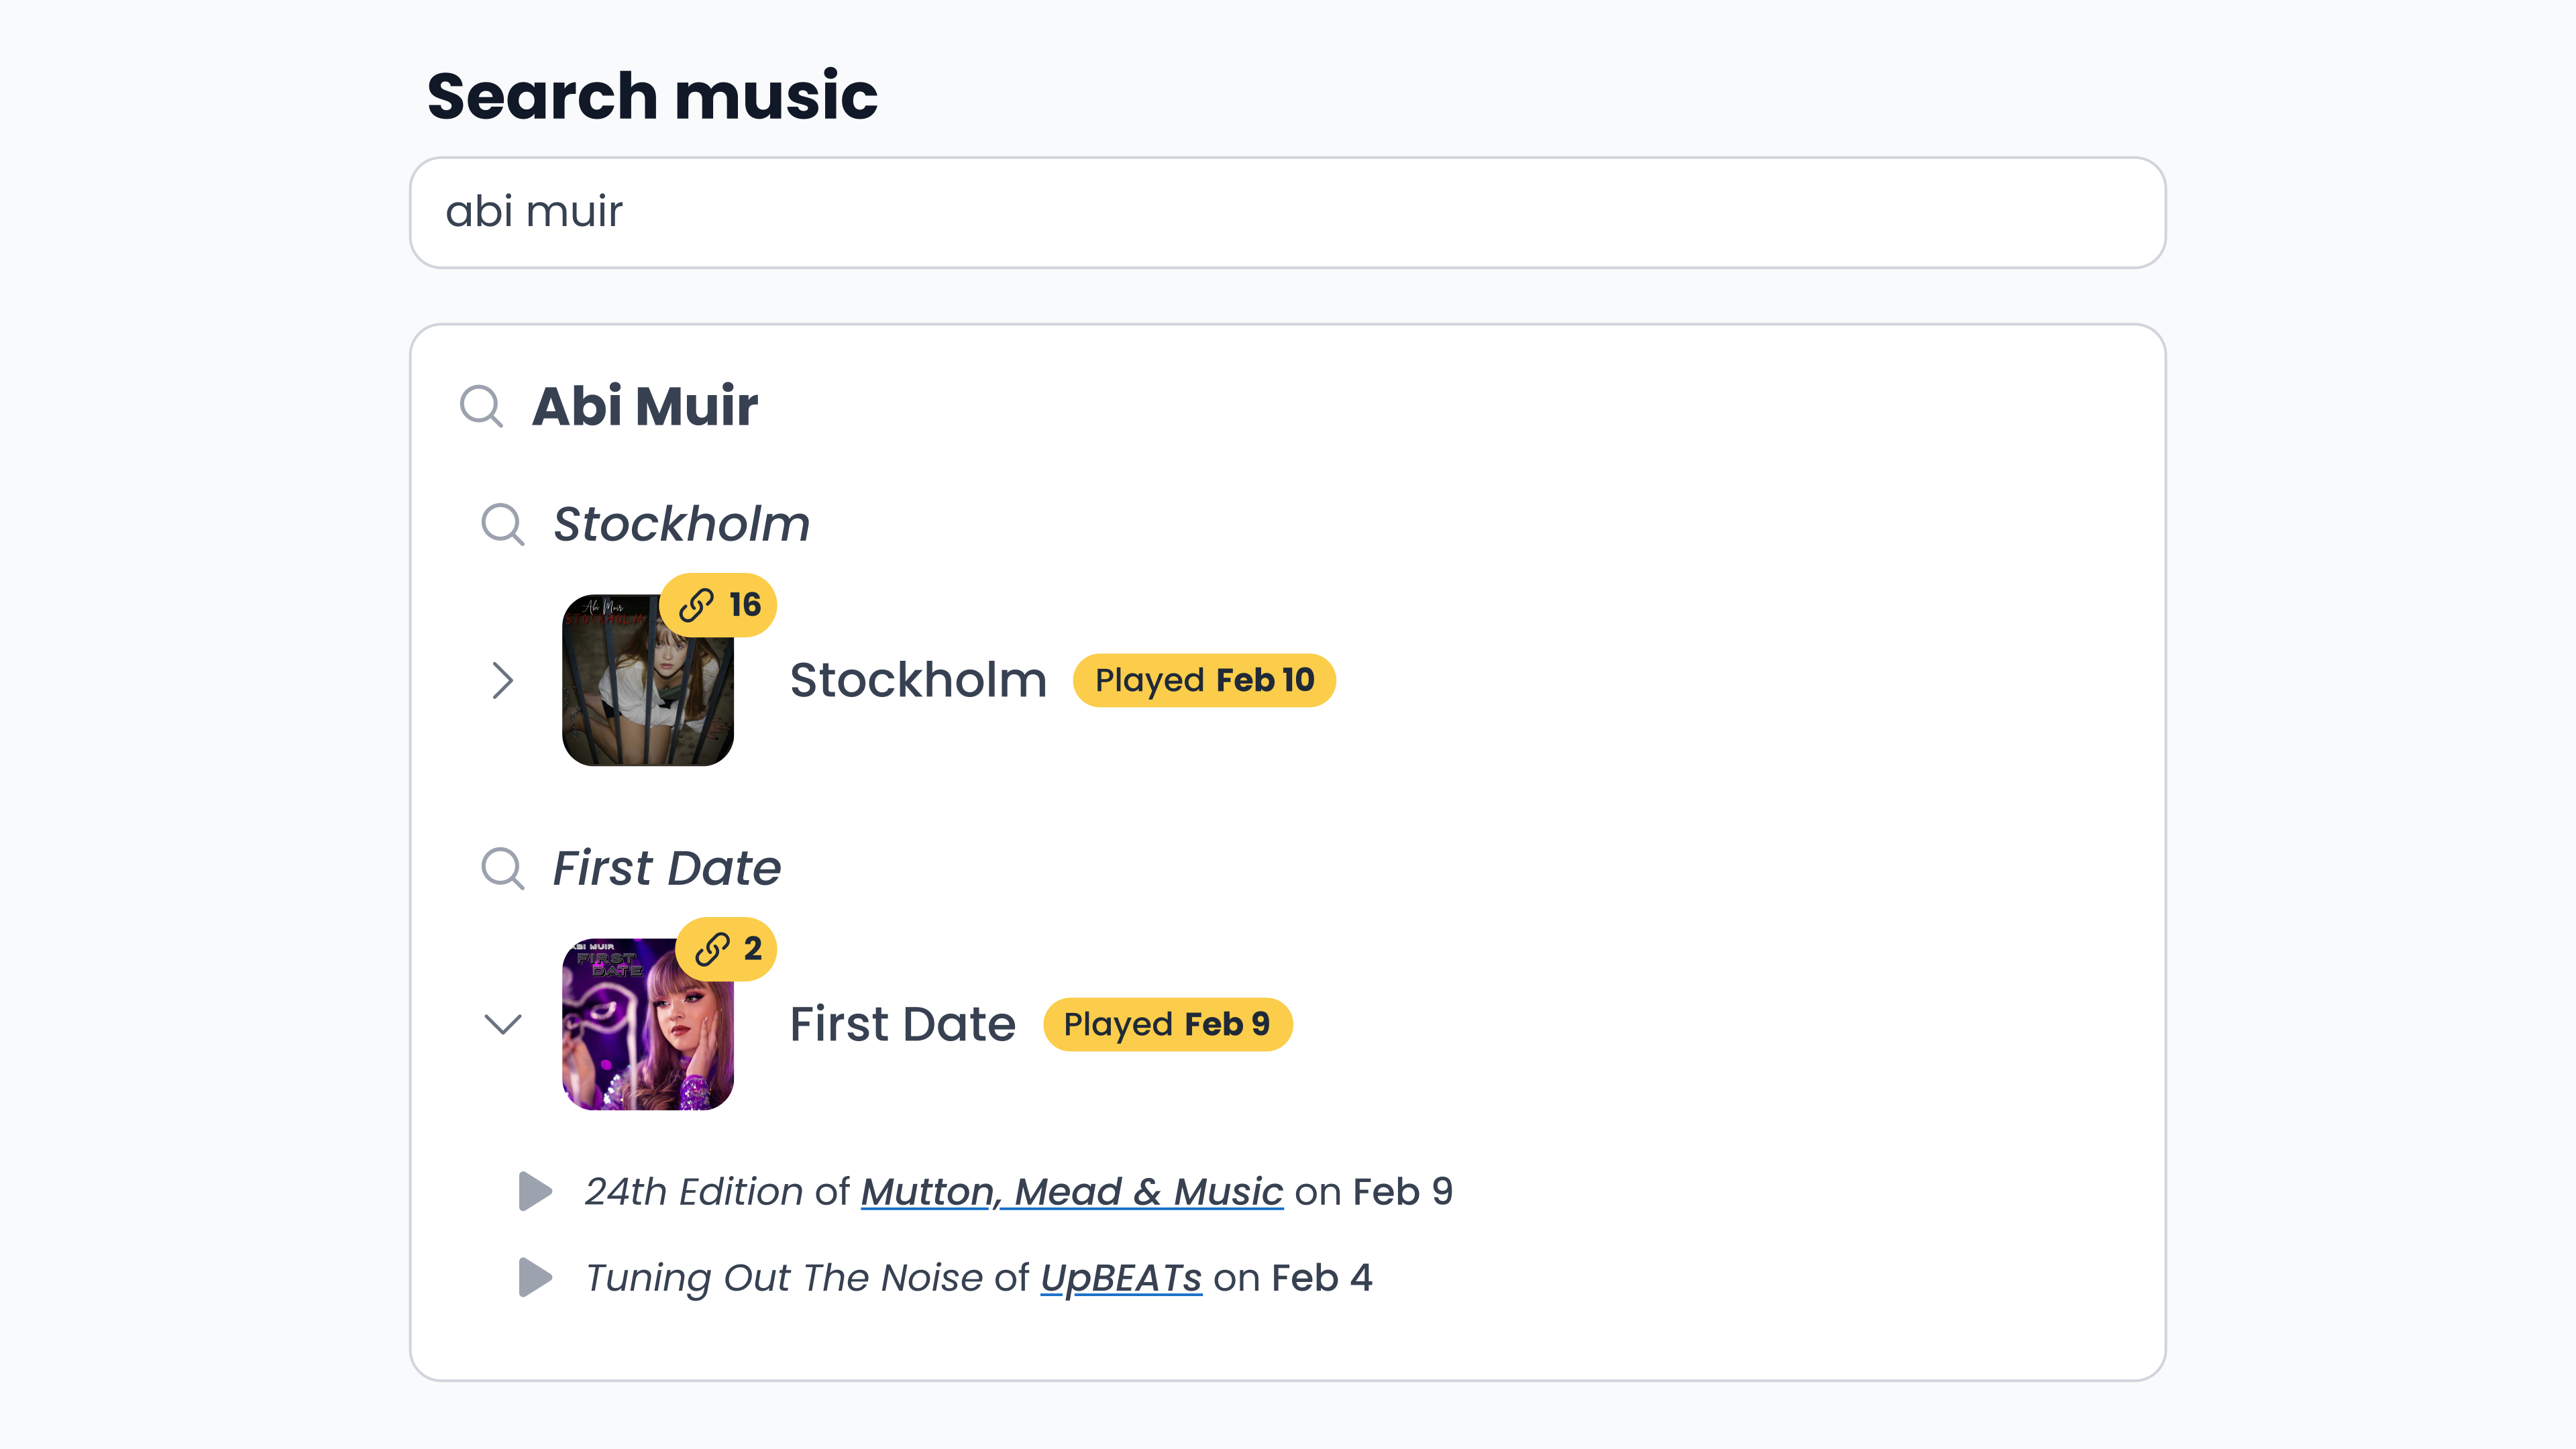 Screenshot of RSS Blue Cupid interface for searching music tracks that have been featured on podcasts.